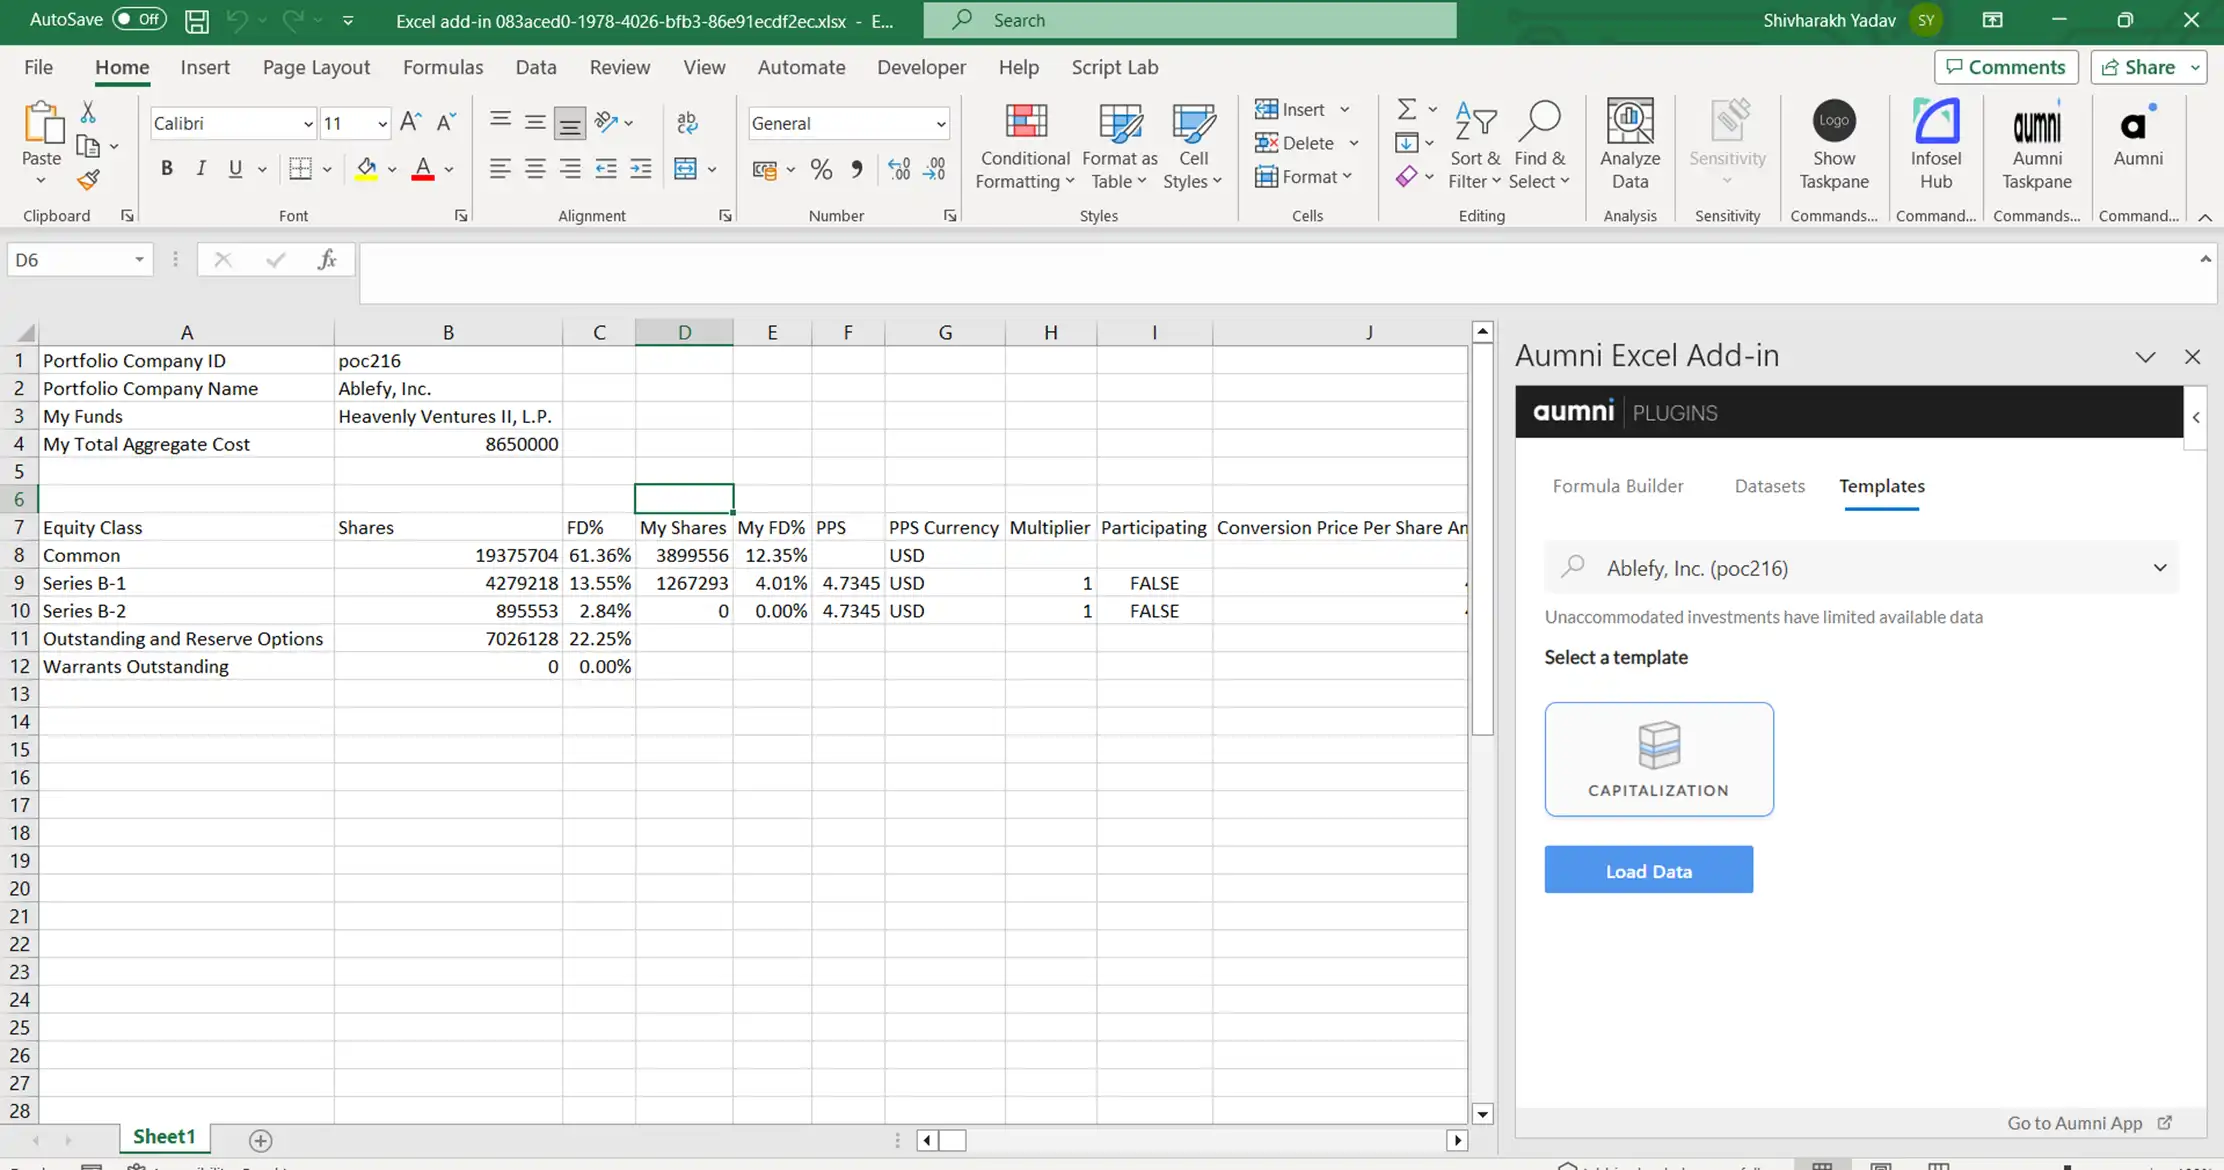 aumni-fund-excel-add-in-for-investment-analysis-03.webp